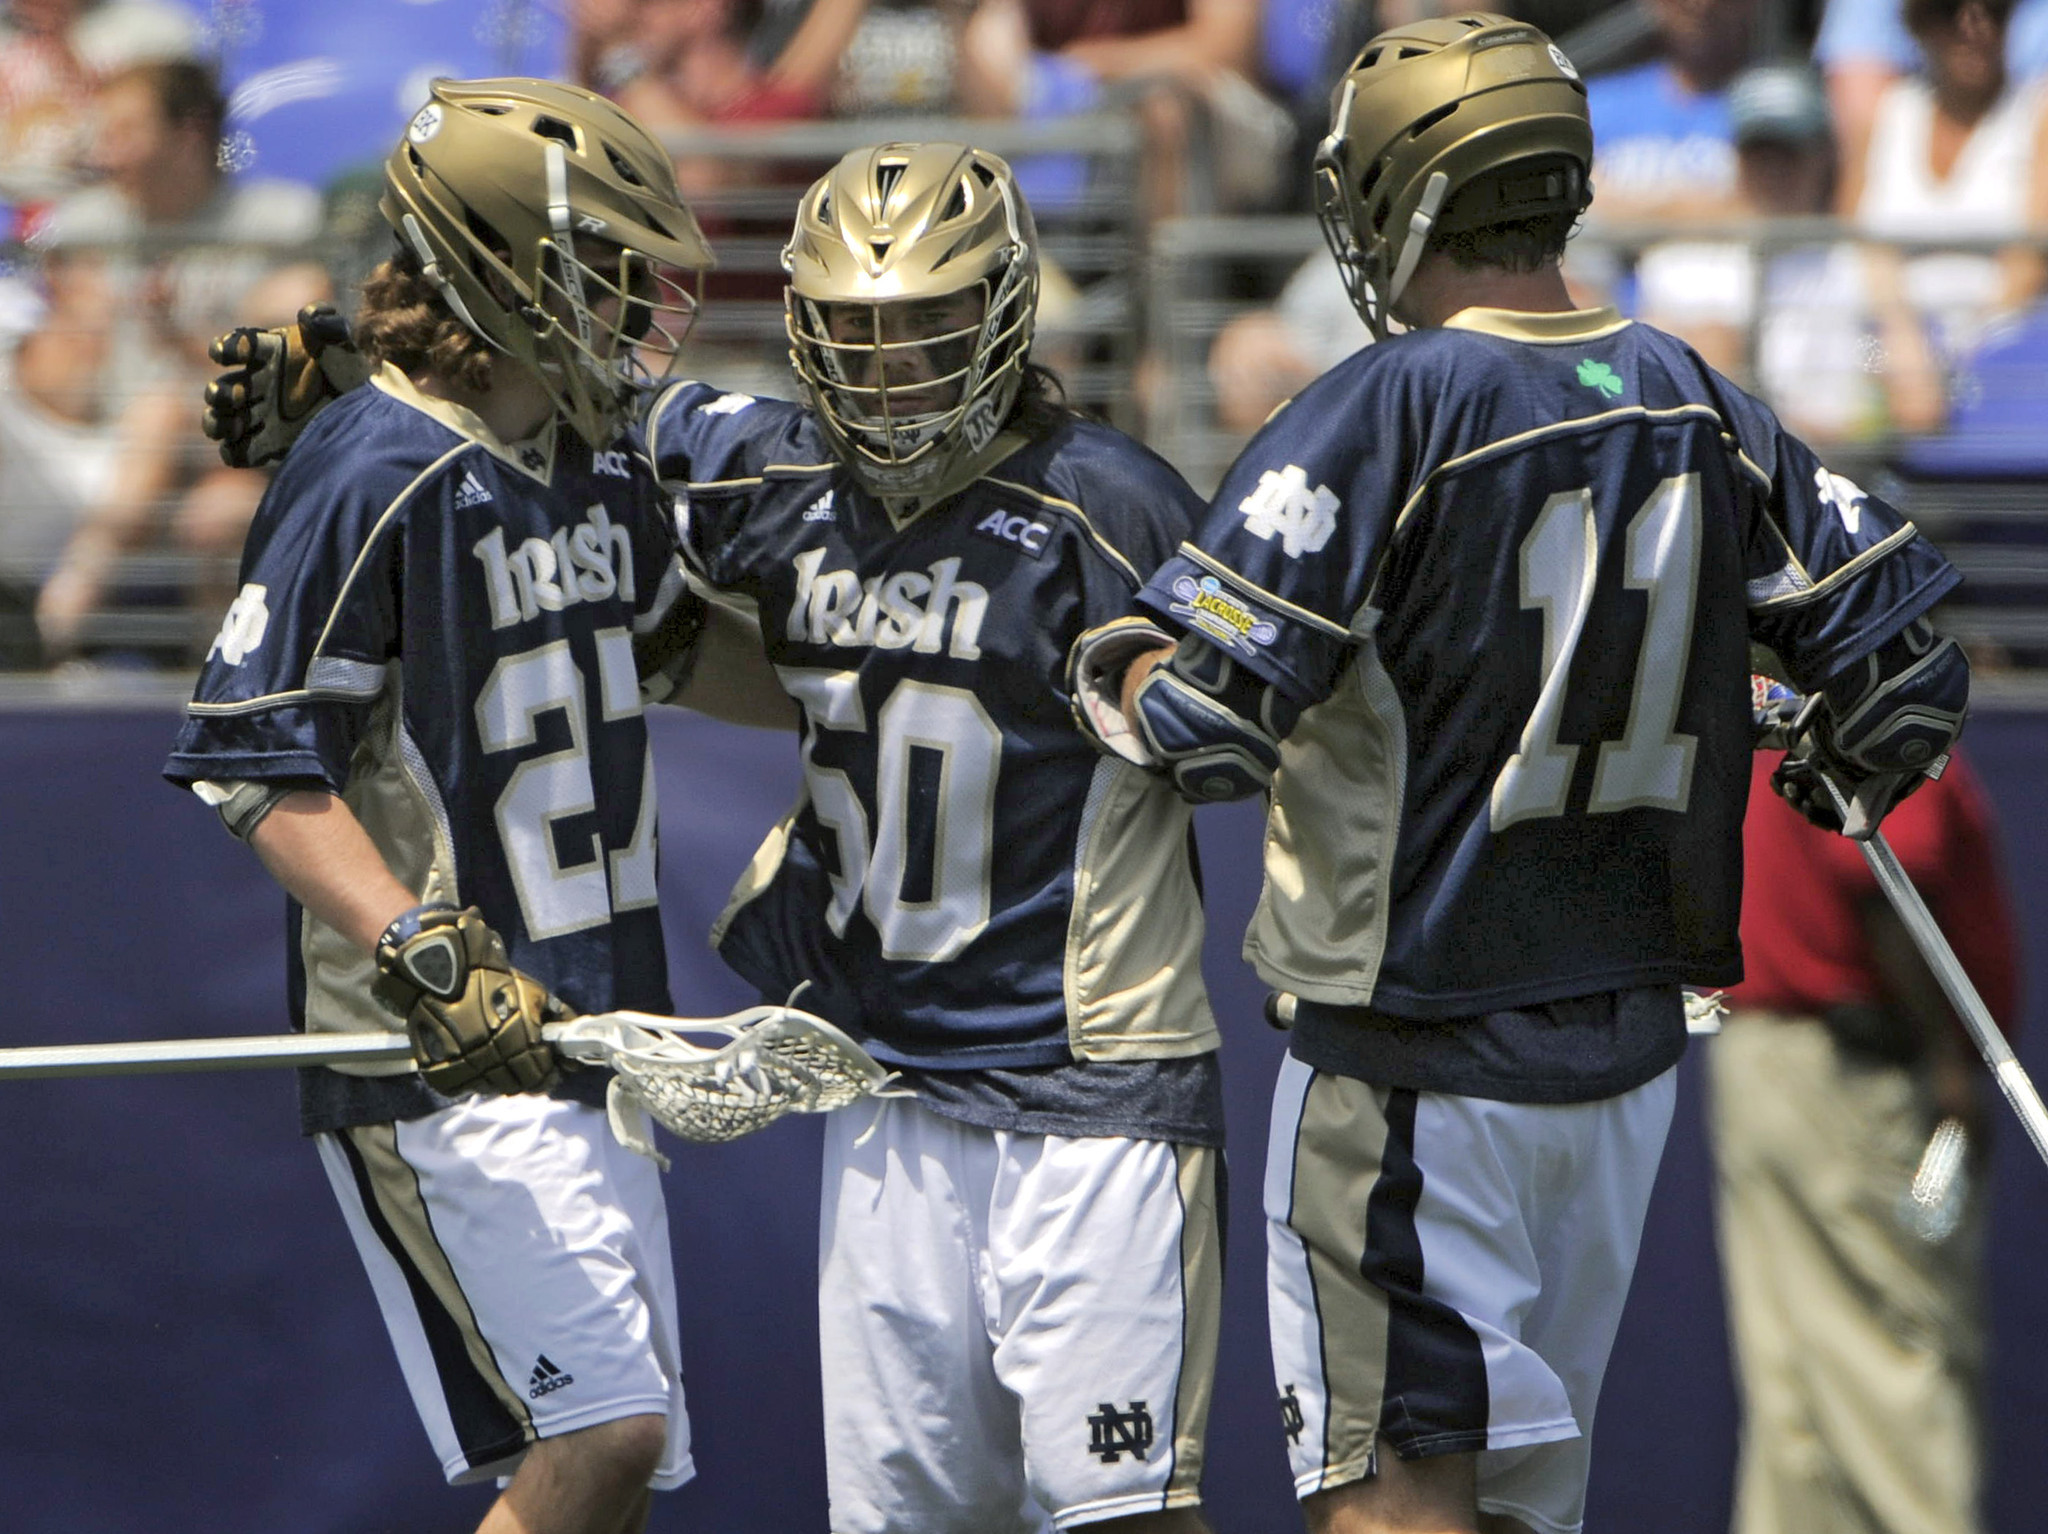 NCAA Division I men's lacrosse tournament selection committee reveals